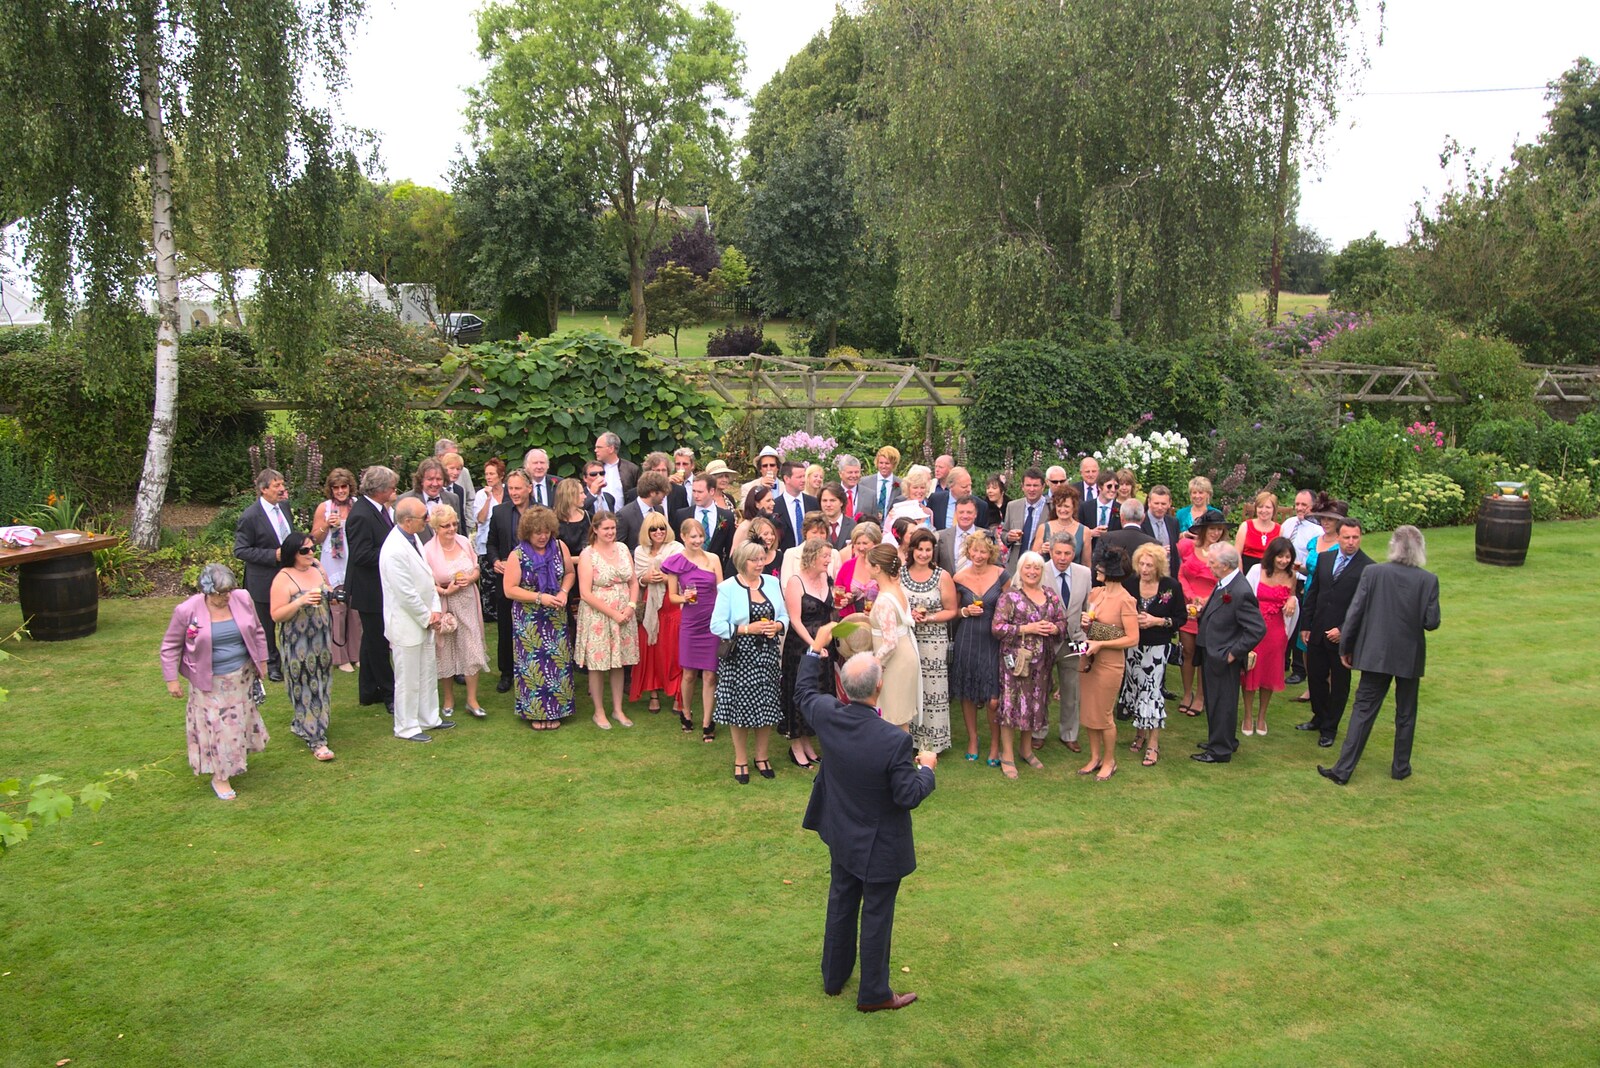 A group photo is prepared from Rob and Wilma's Wedding, Thornham and Thrandeston, Suffolk - 6th August 2011